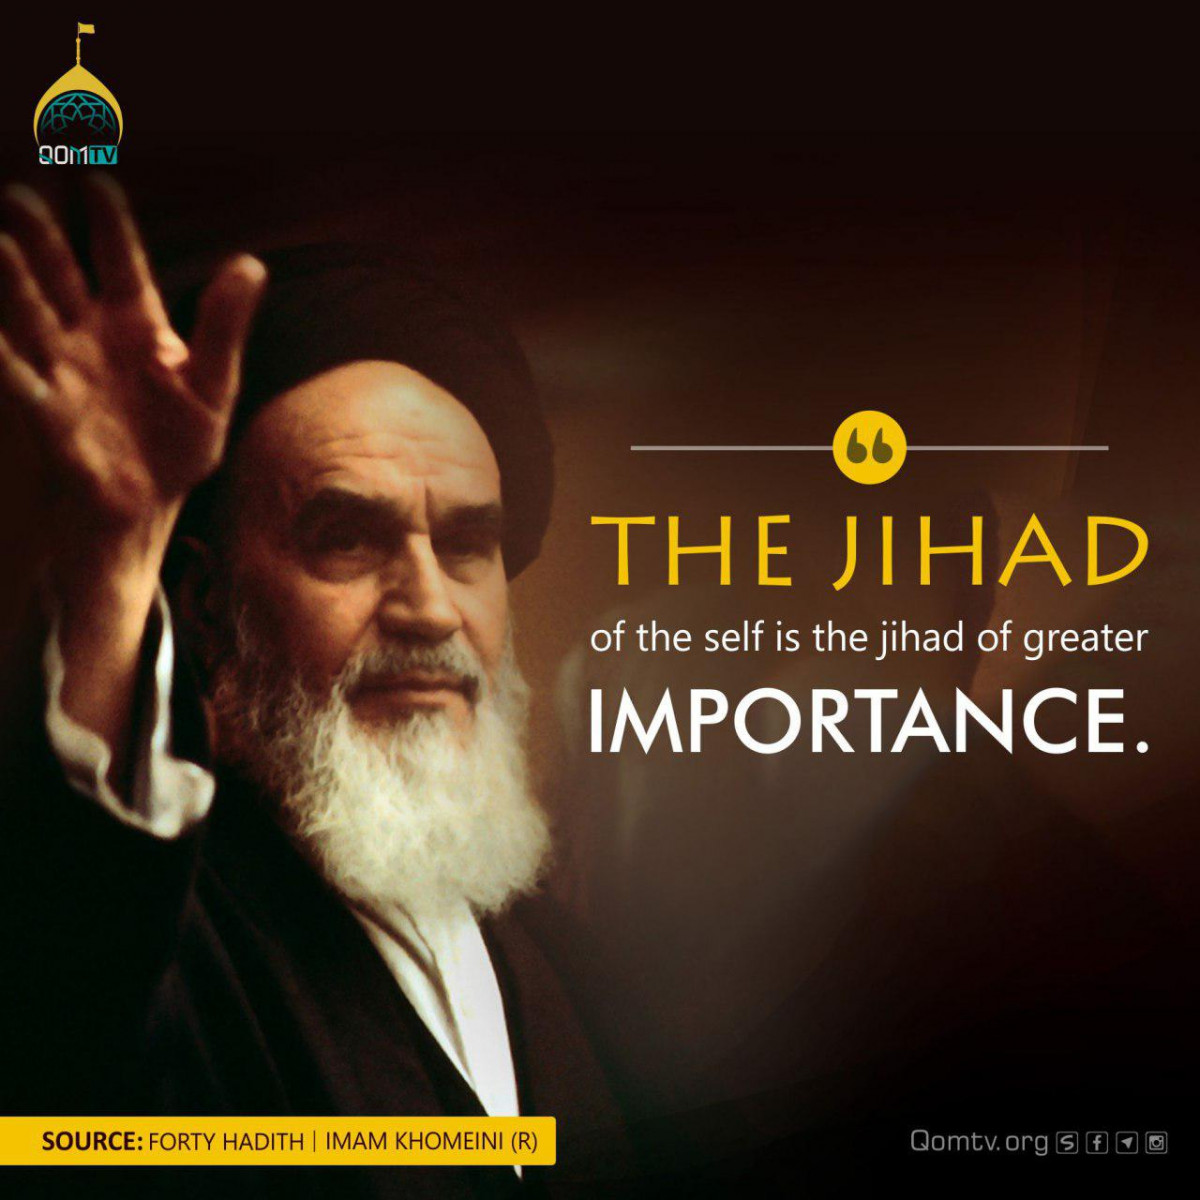 "The jihad of the self is the jihad of greater importance."